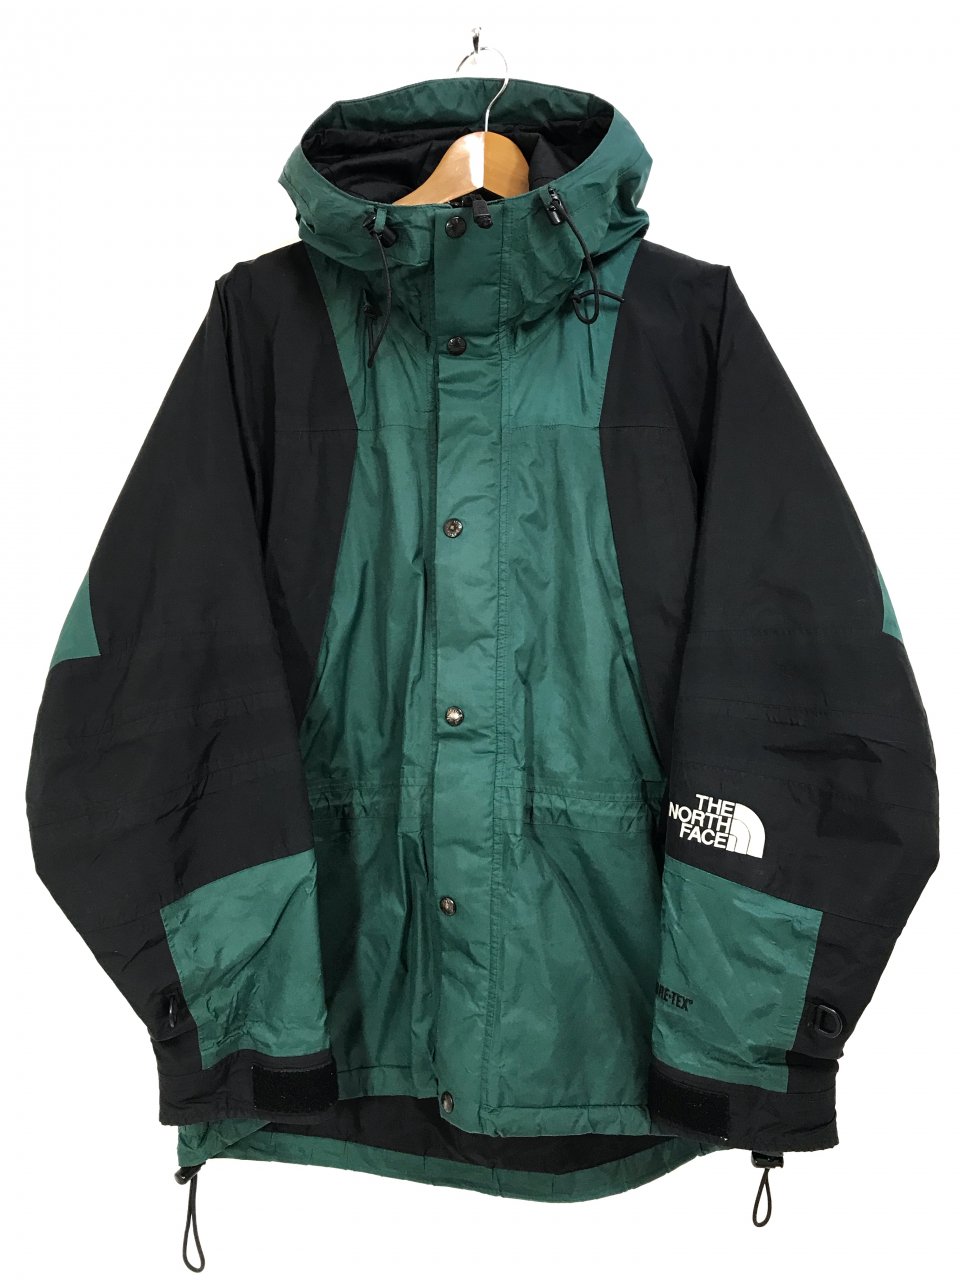 90s THE NORTH FACE Mountain Light Jacket 緑黒 S ノースフェイス 